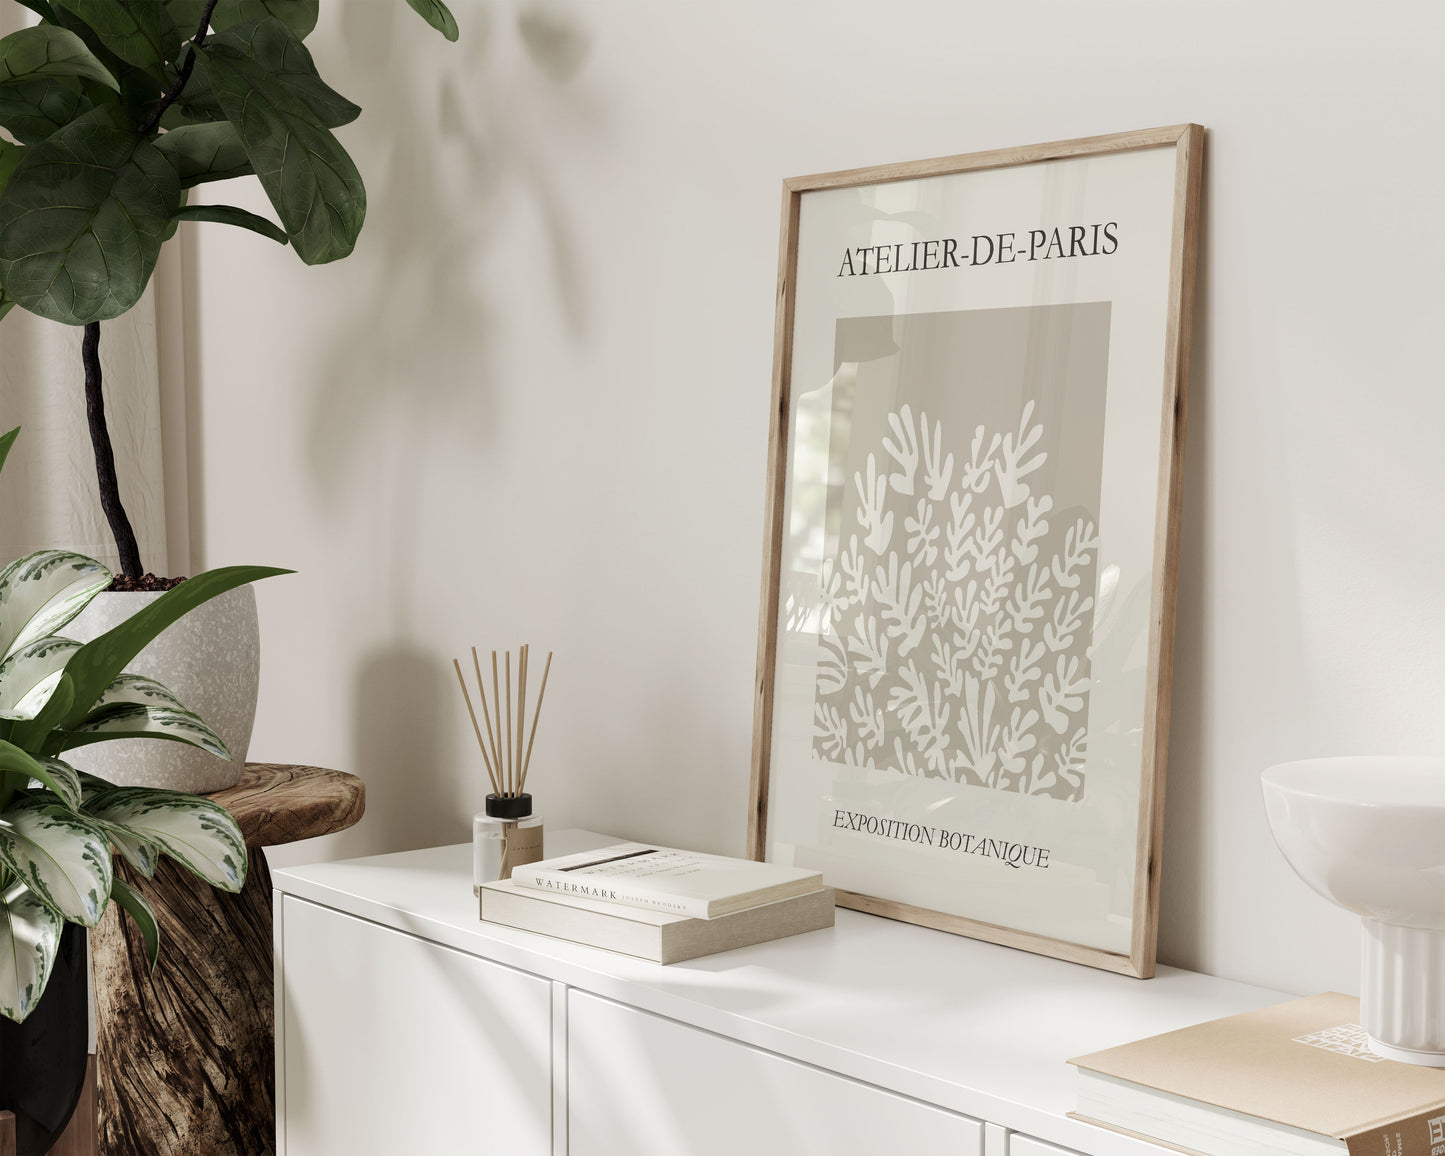 Neutral wall art print in beige, with leaves design. Poster inspired by Henri Matisse. With text Atelier De Paris, Exposition Botanique